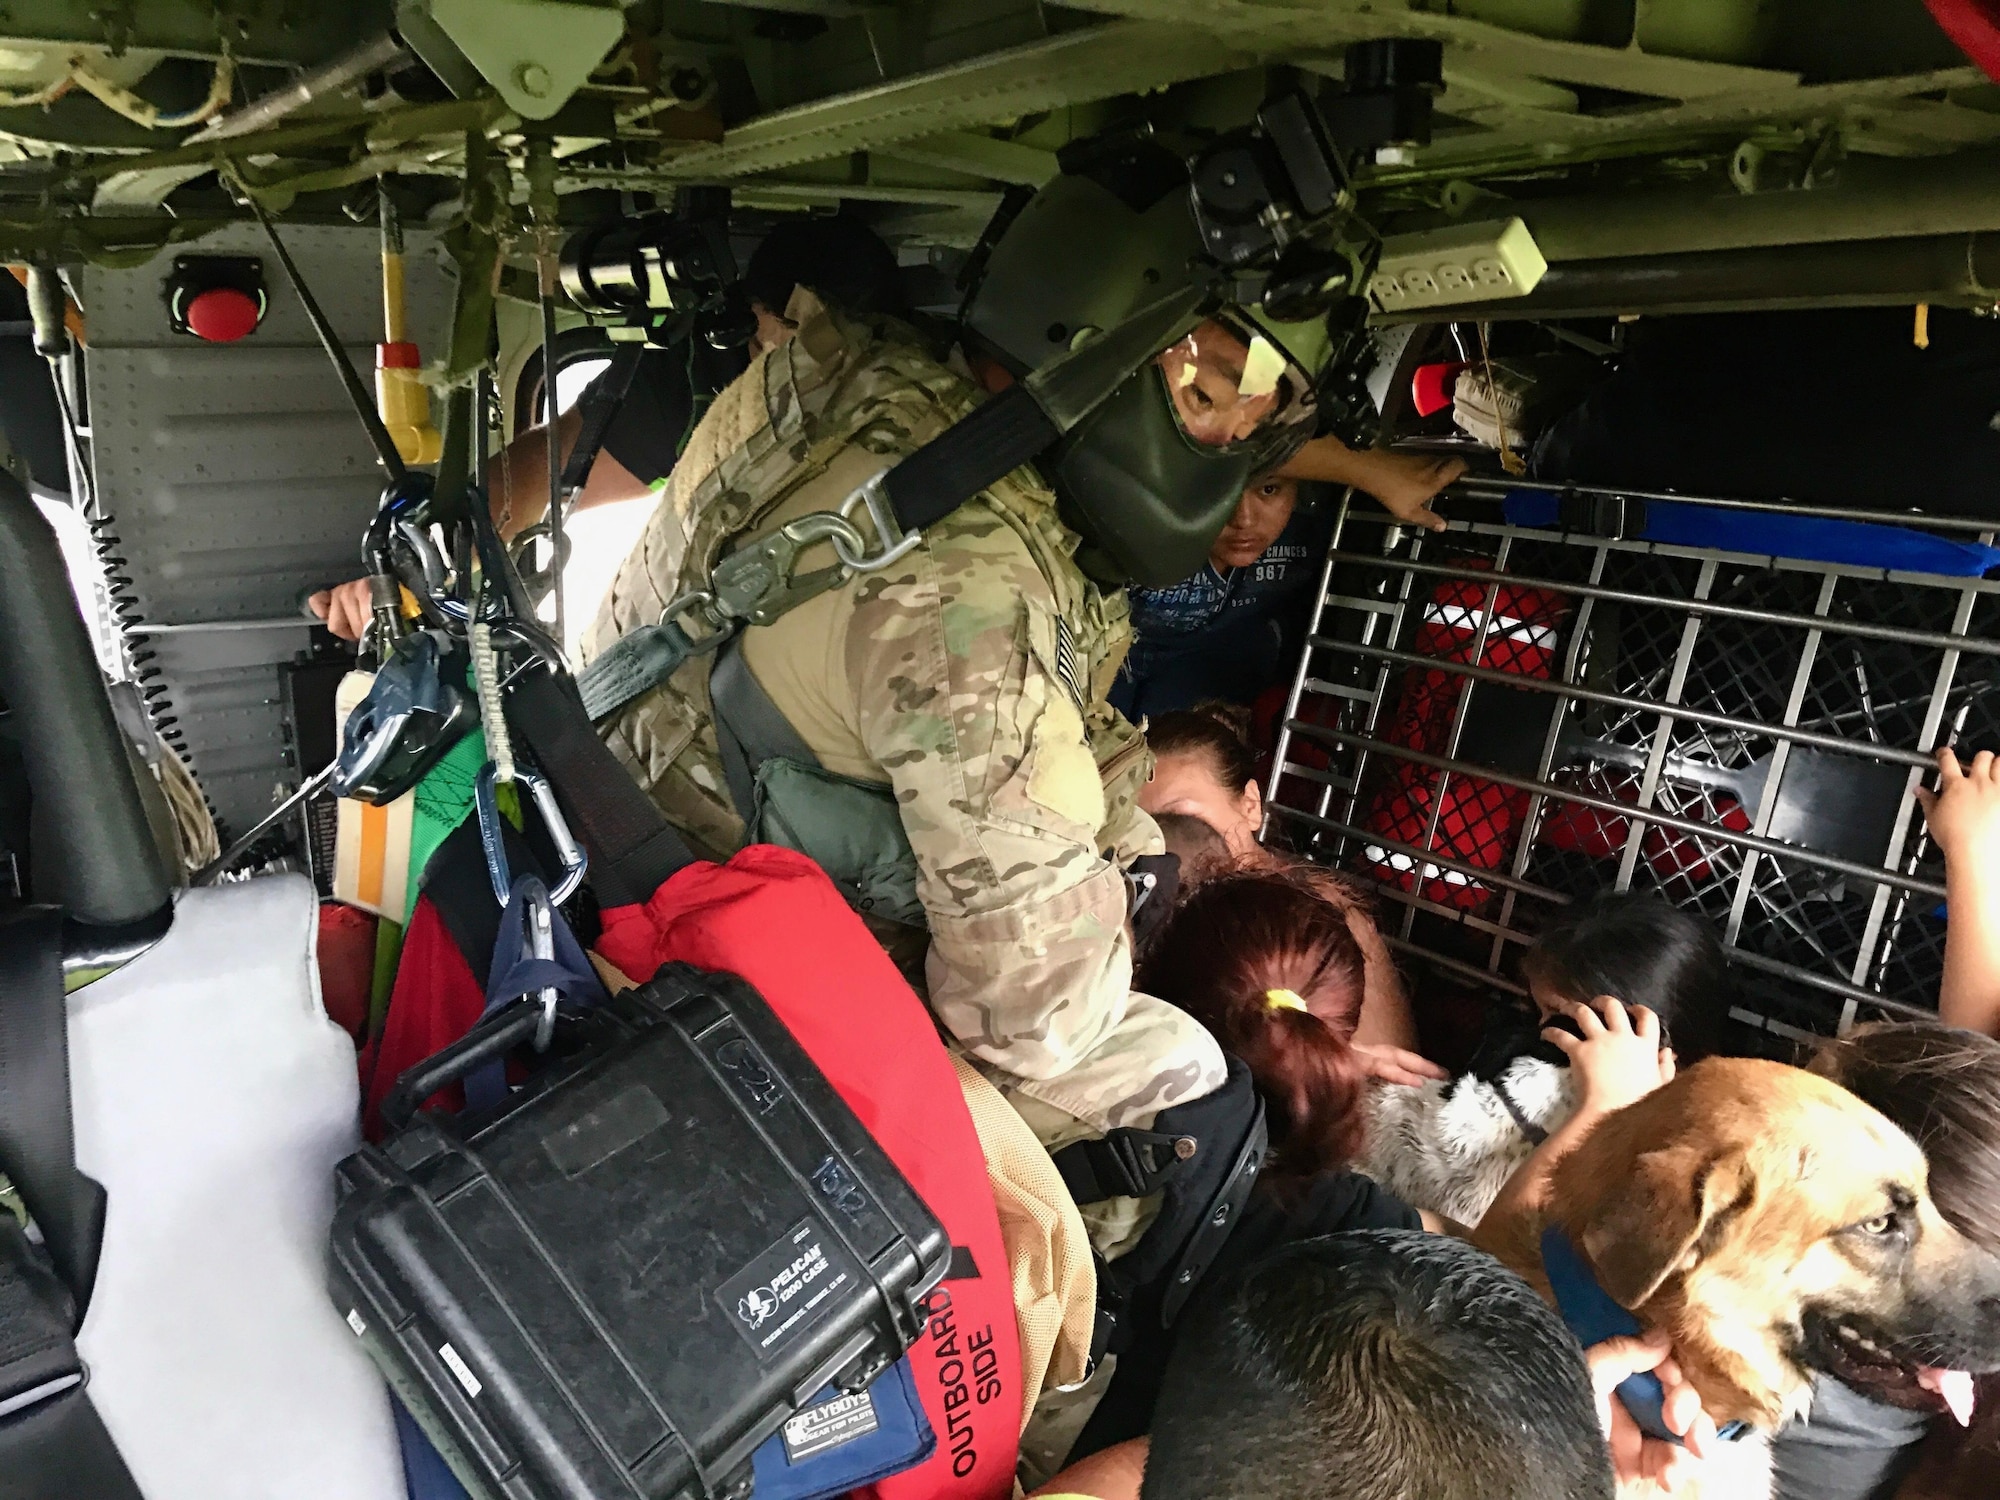 Rescue teams from the 920th Rescue Wing, Patrick Air Force Base, Florida, rescue stranded victims trapped by flooding from Hurricane Harvey Aug. 31, 2017 in Beaumont, Texas. The 920th RQW deployed roughly 90 Citizen Airmen, three Pave Hawks and two HC-130Ns in support of Air Force Northern’s search and rescue mission for FEMA disaster relief efforts. (U.S. Air Force photo/Tech. Sgt. Lindsey Maurice)